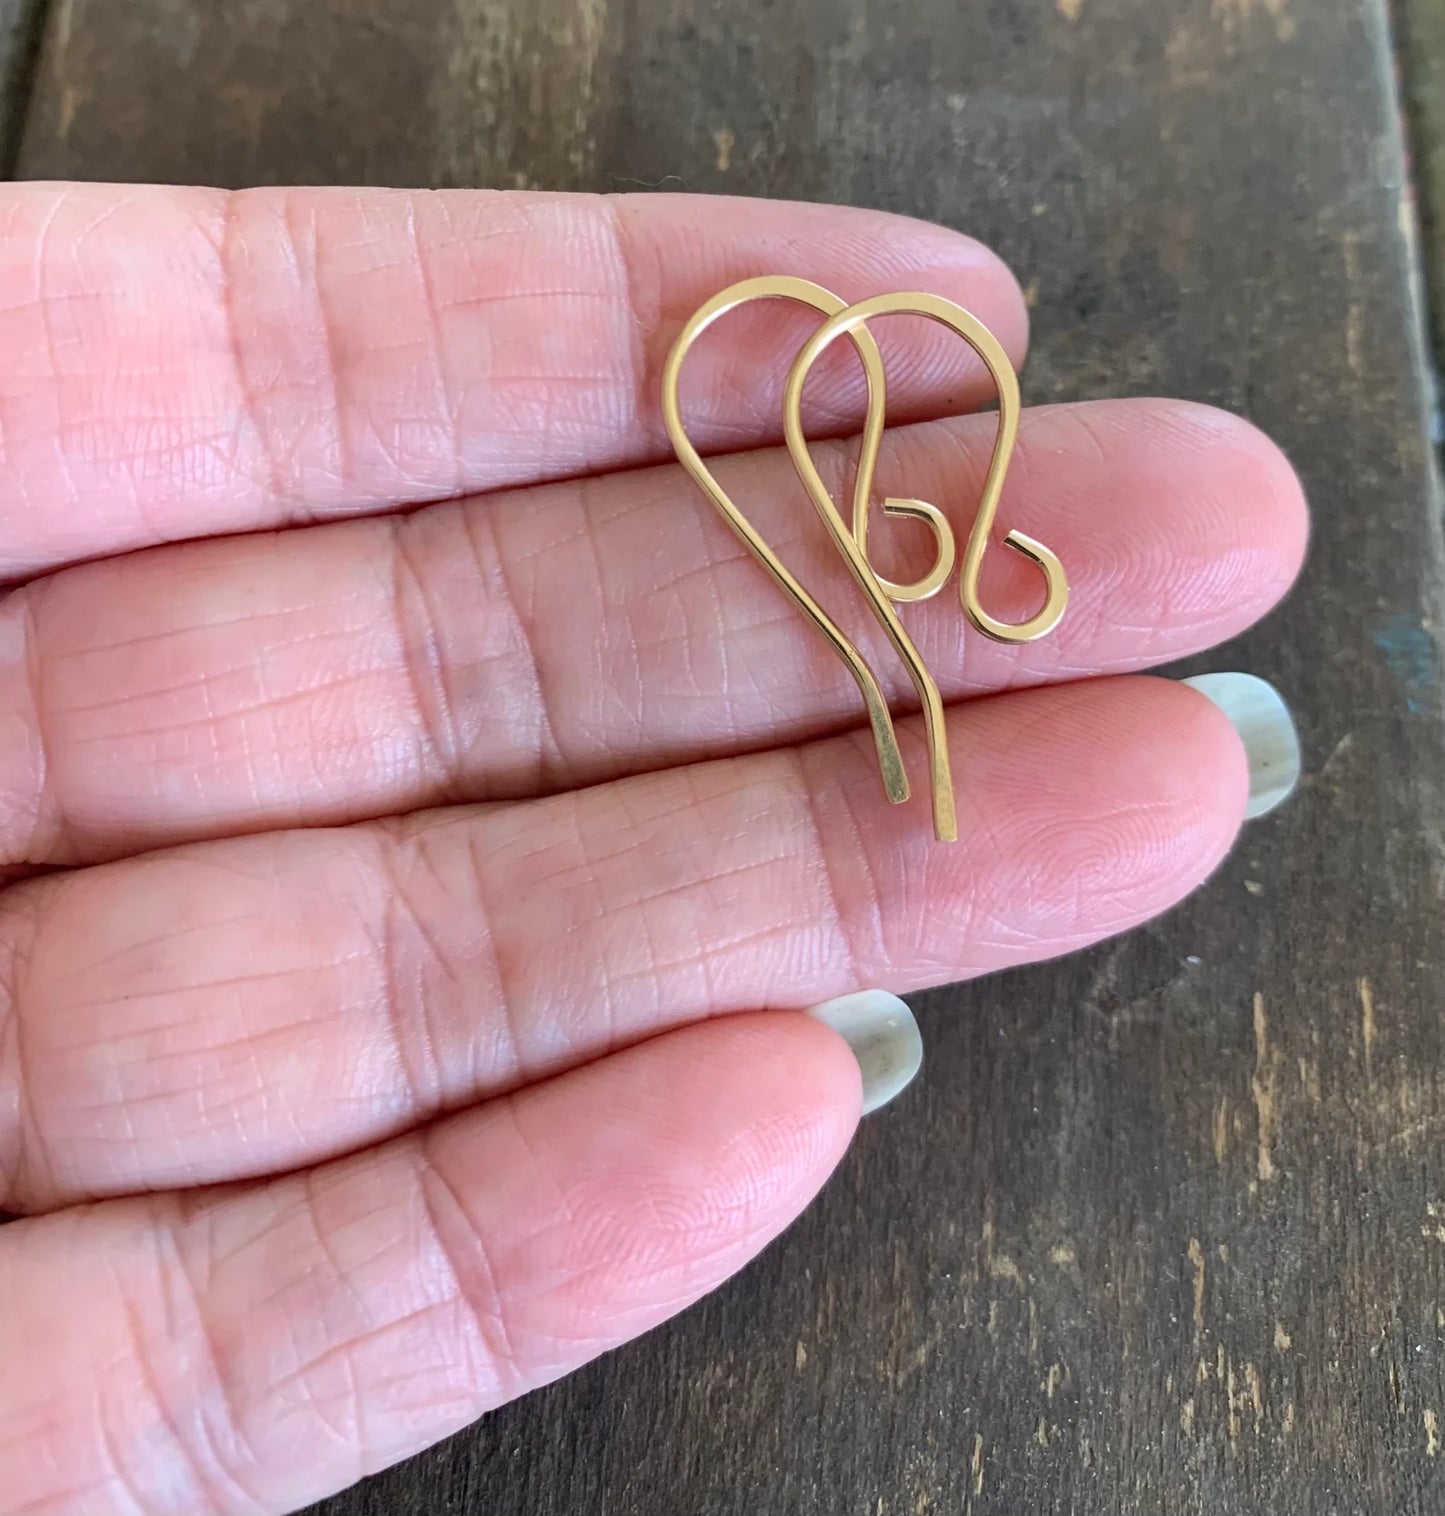 HEAVY 18 gauge Dandy 14kt Yellow or Rose Goldfill Earwires - Handmade. Handforged. Made to Order